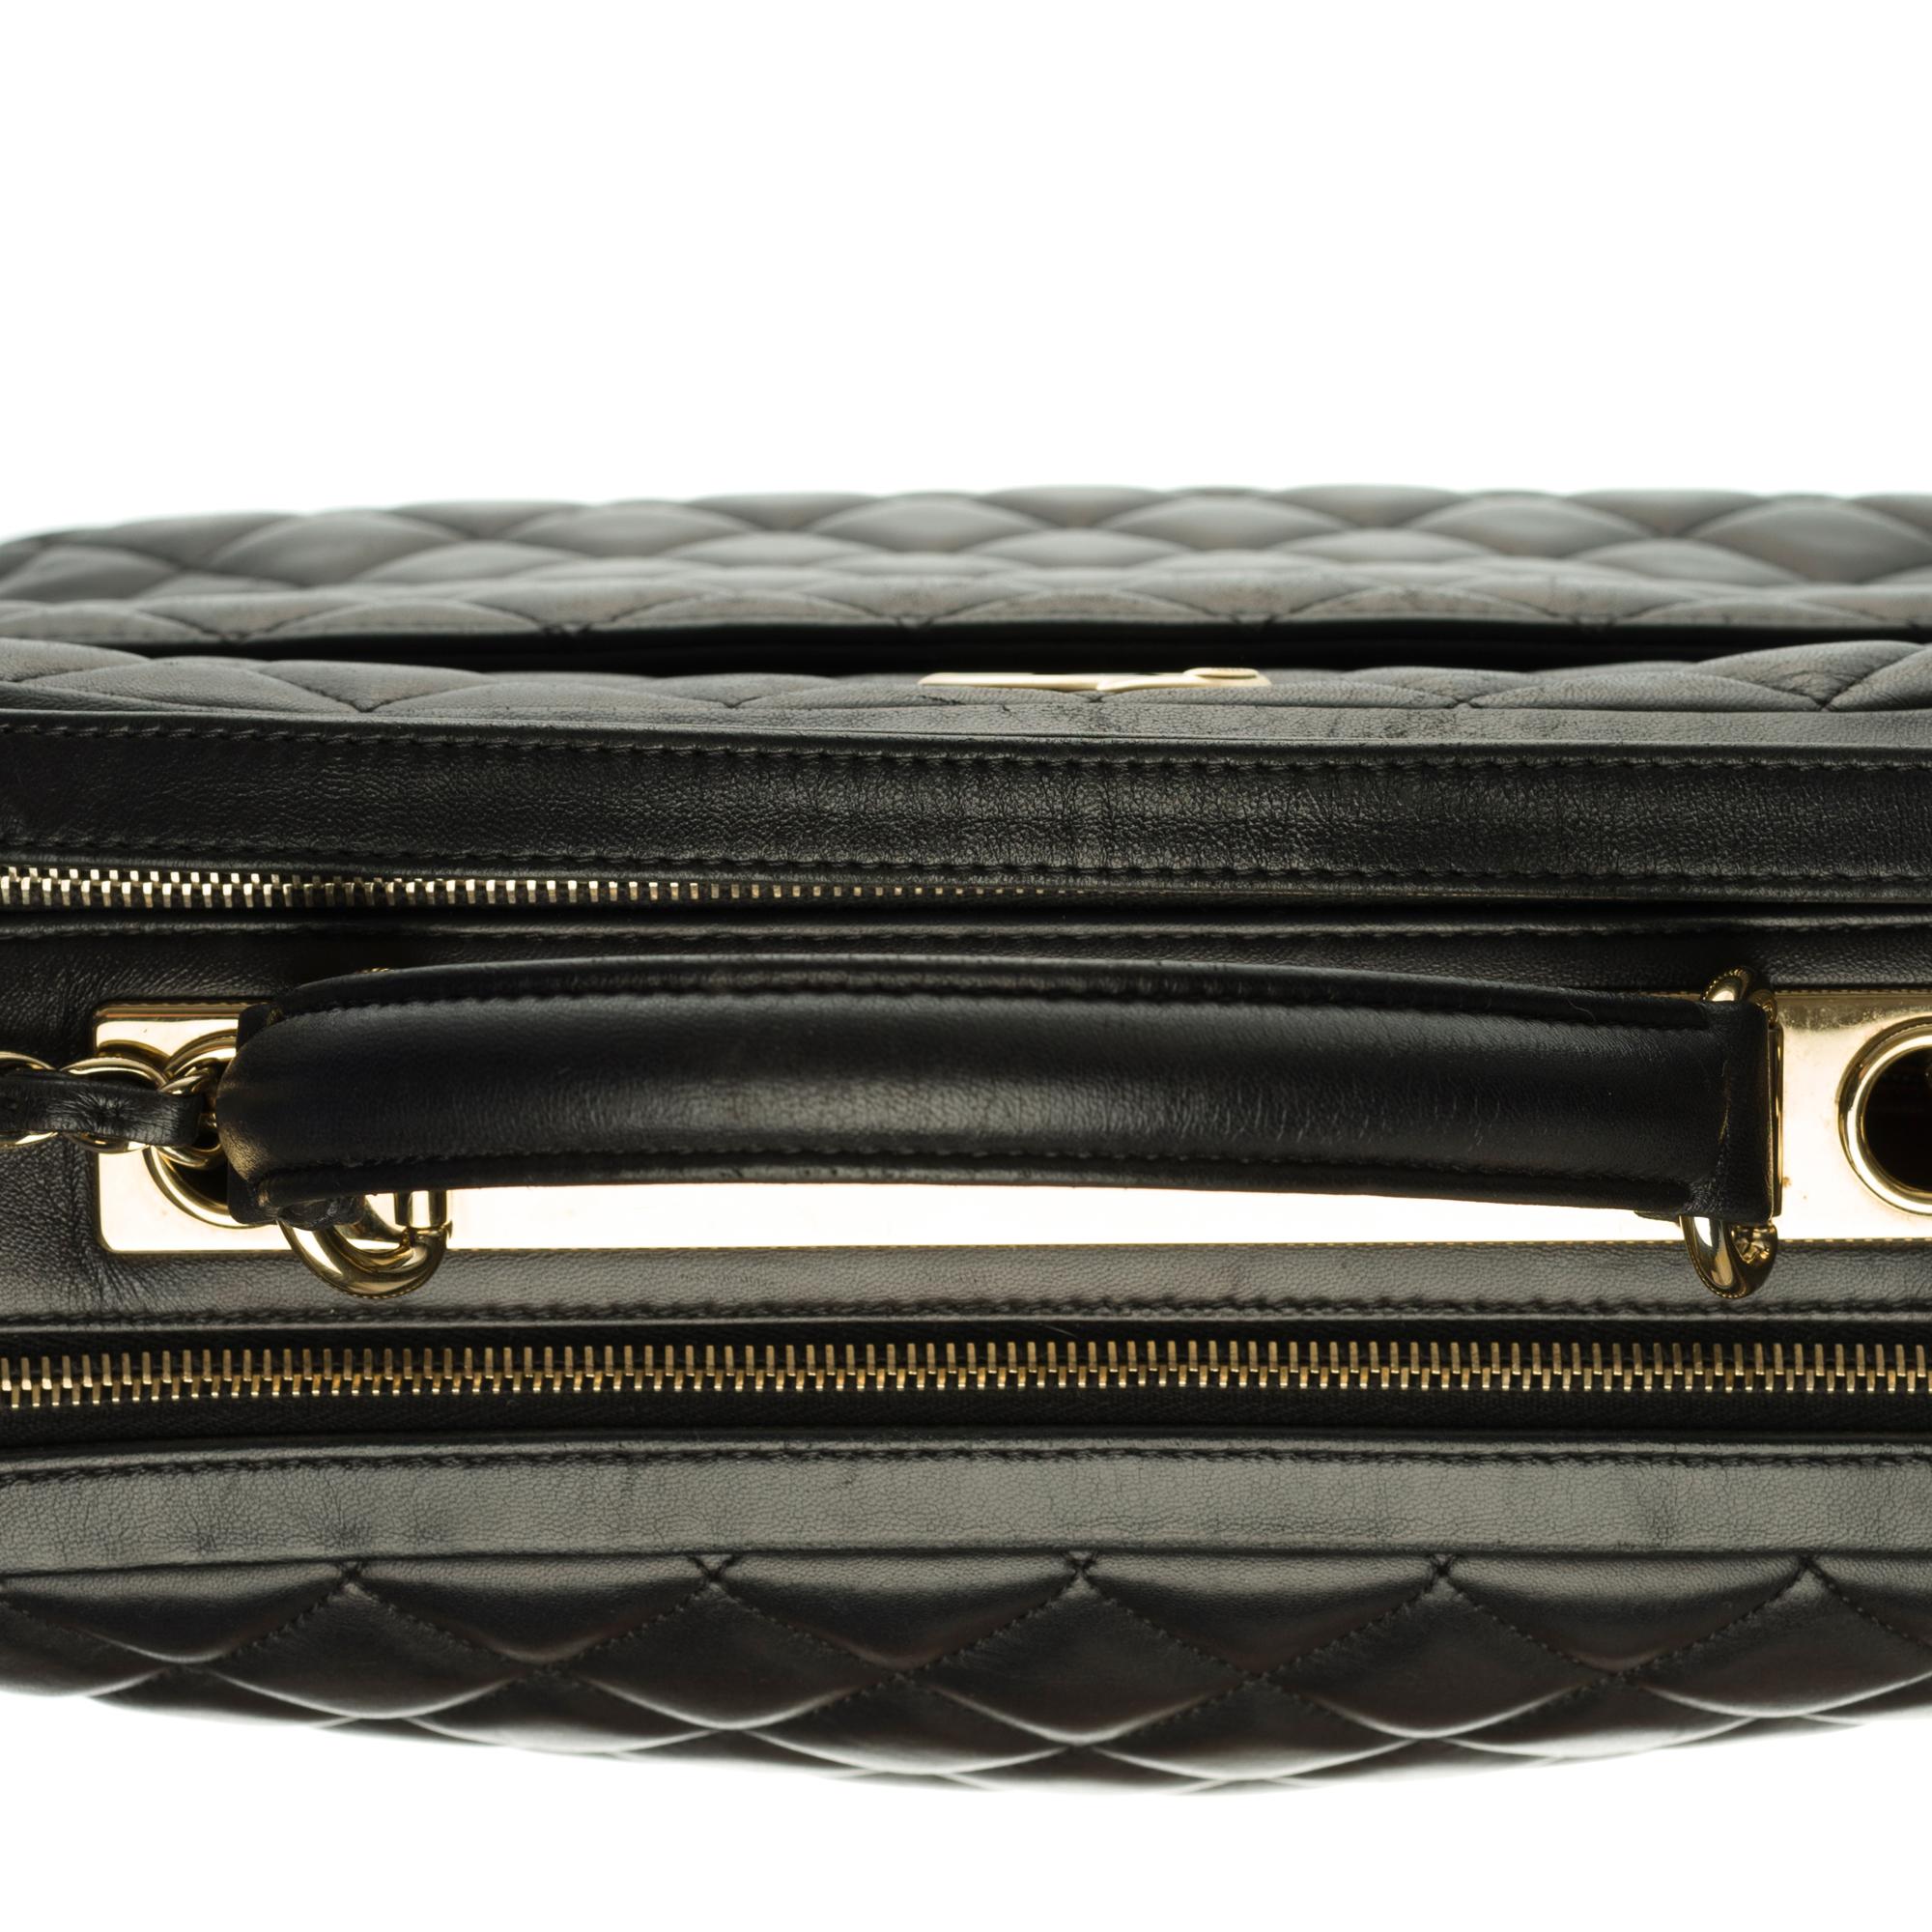 Amazing Chanel CC Vanity Case Bag with gold hardware 4